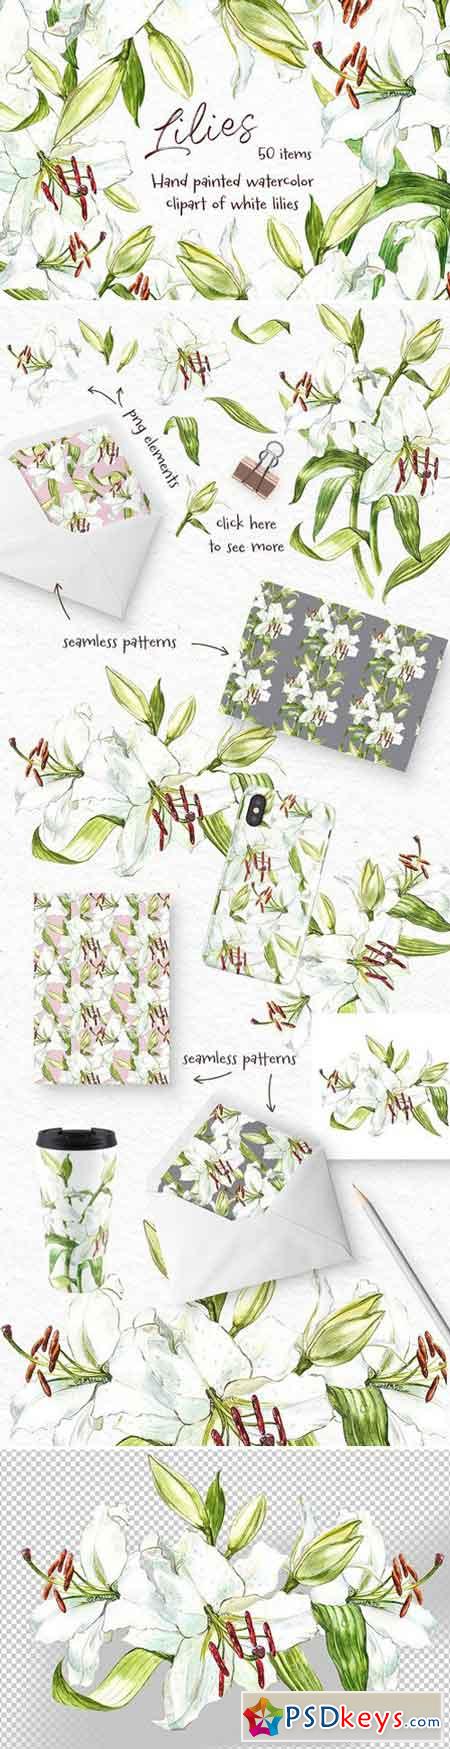 White Lilies watercolor clipart 2356766